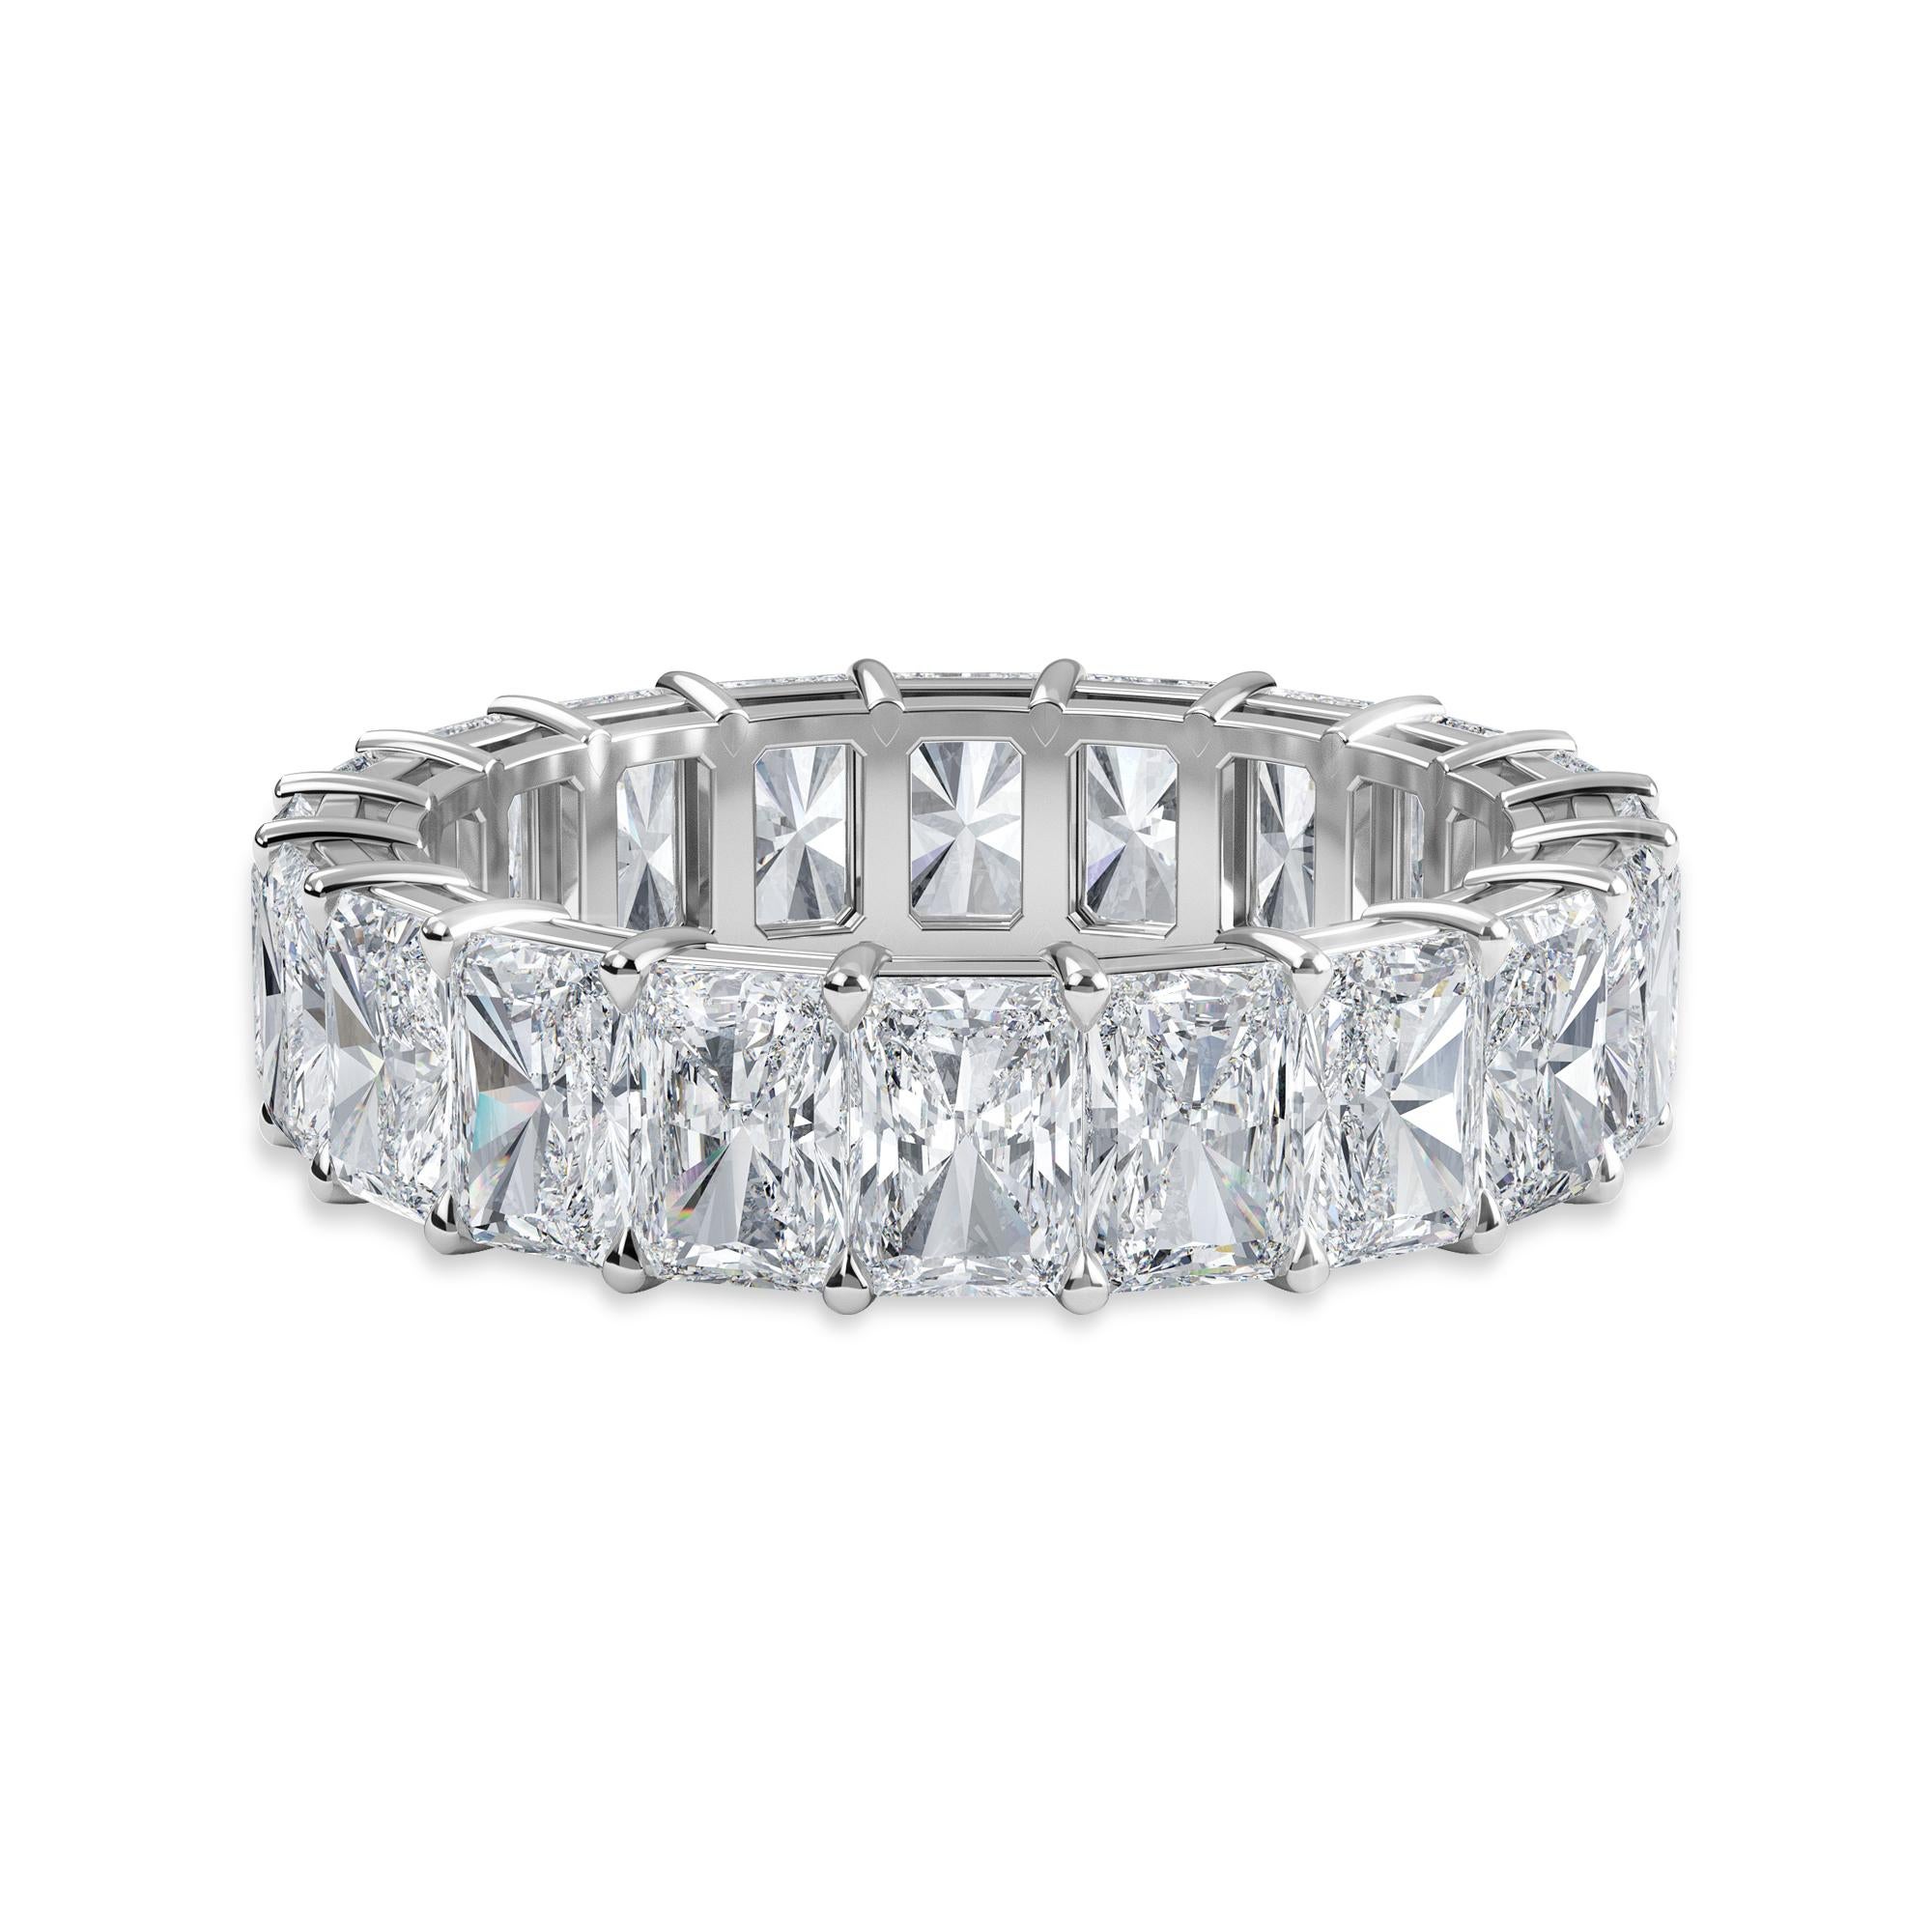 This Radiant Diamond Ring features 20 diamonds and has a total carat of 6.25.
The diamonds are F color, VS clarity. The ring is a finger size 6.25 and is set in platinum.